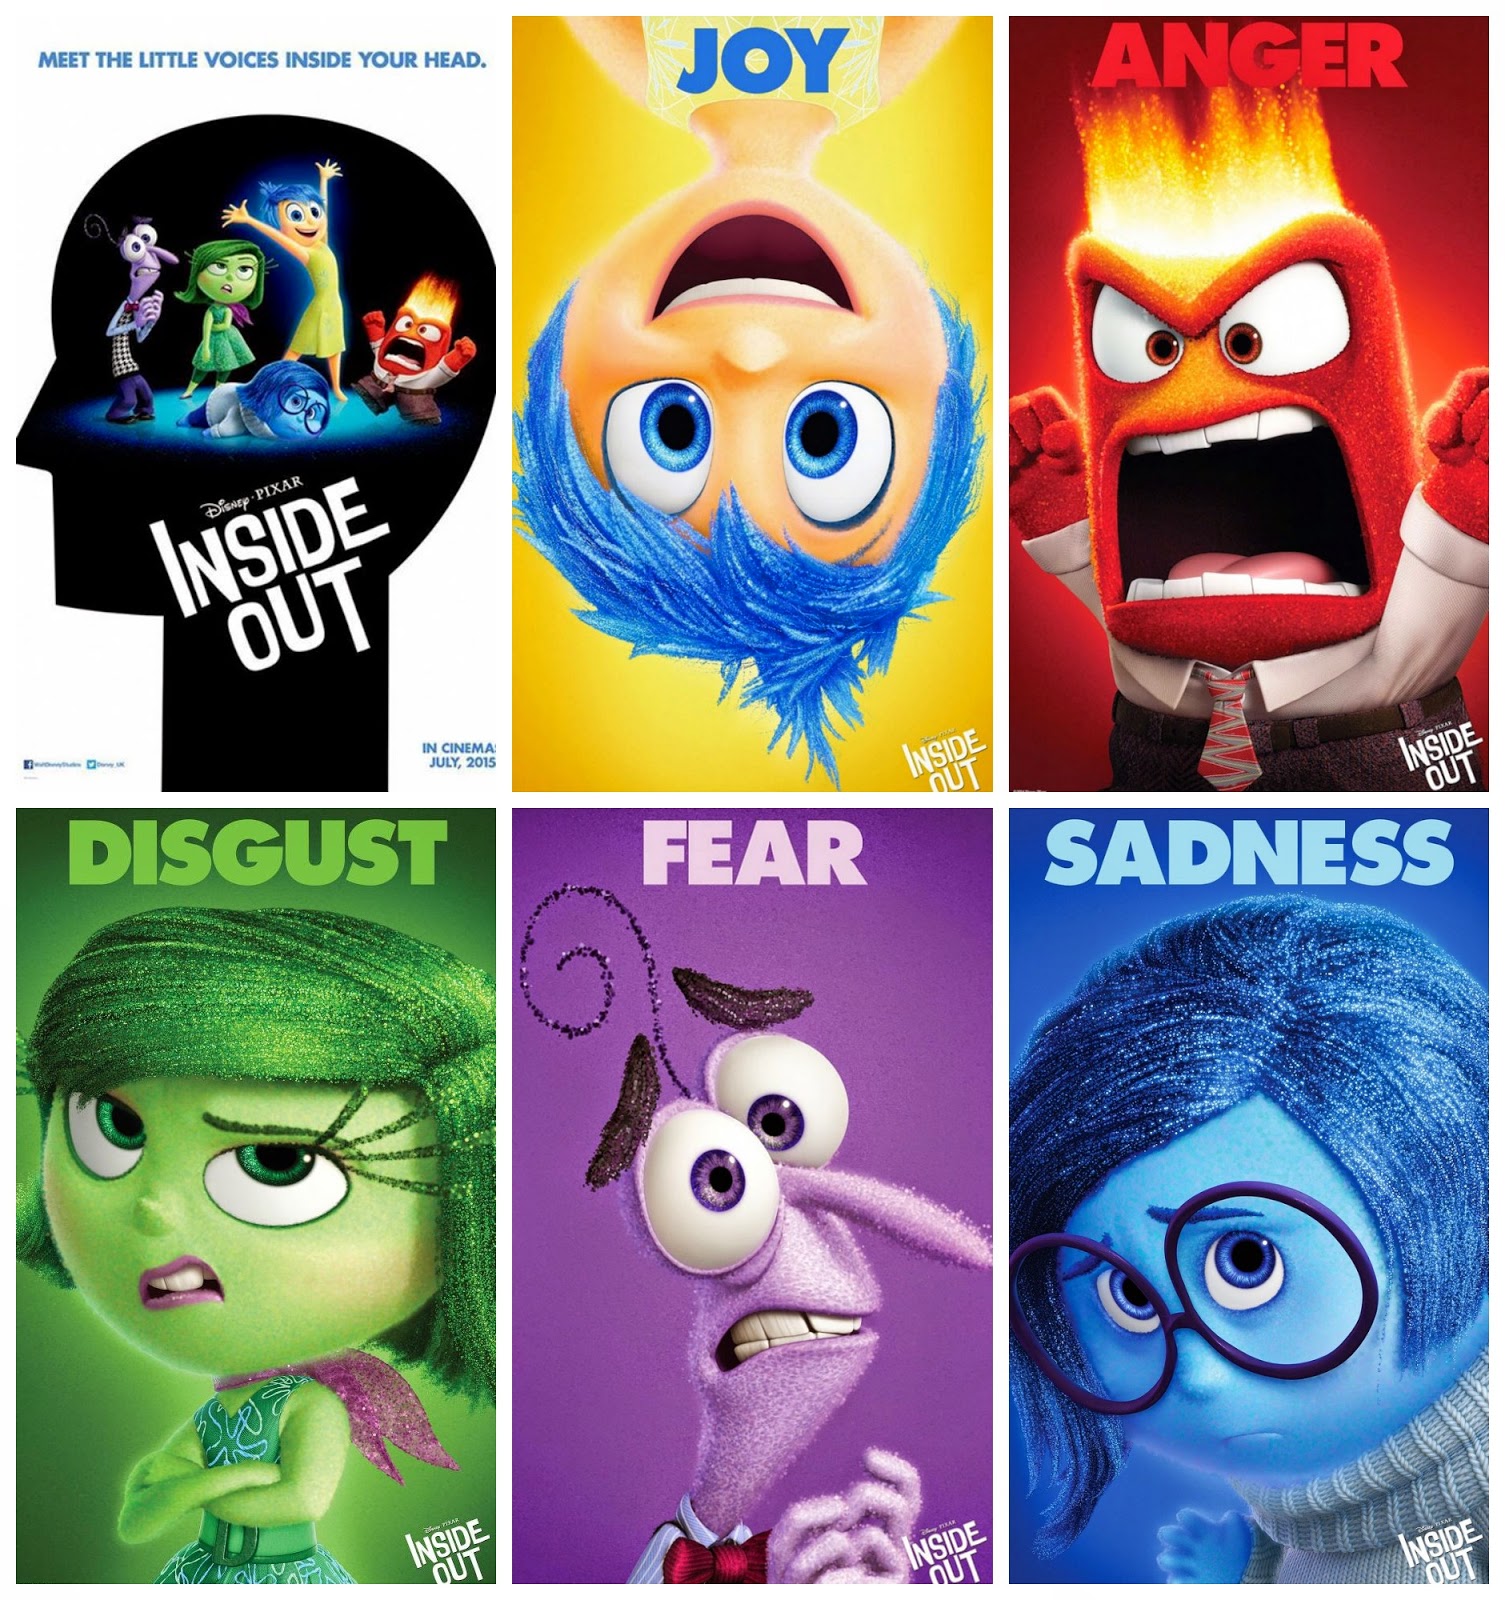 Character Posters of Disney/Pixar's 'Inside Out' (2015) - Releasing on